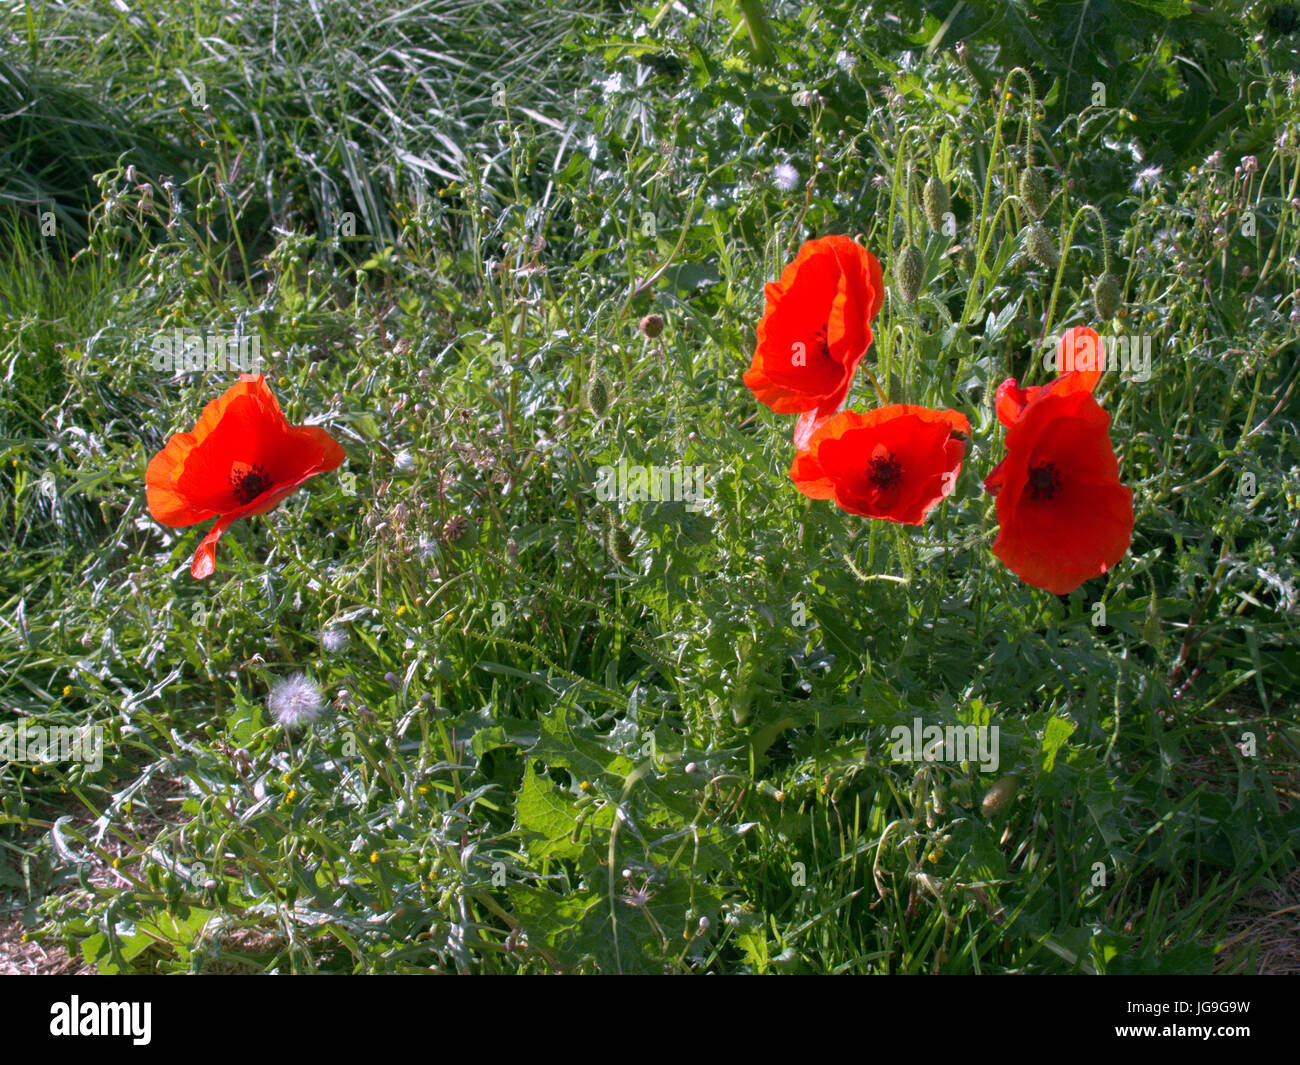 red poppies in a field of green grass Stock Photo